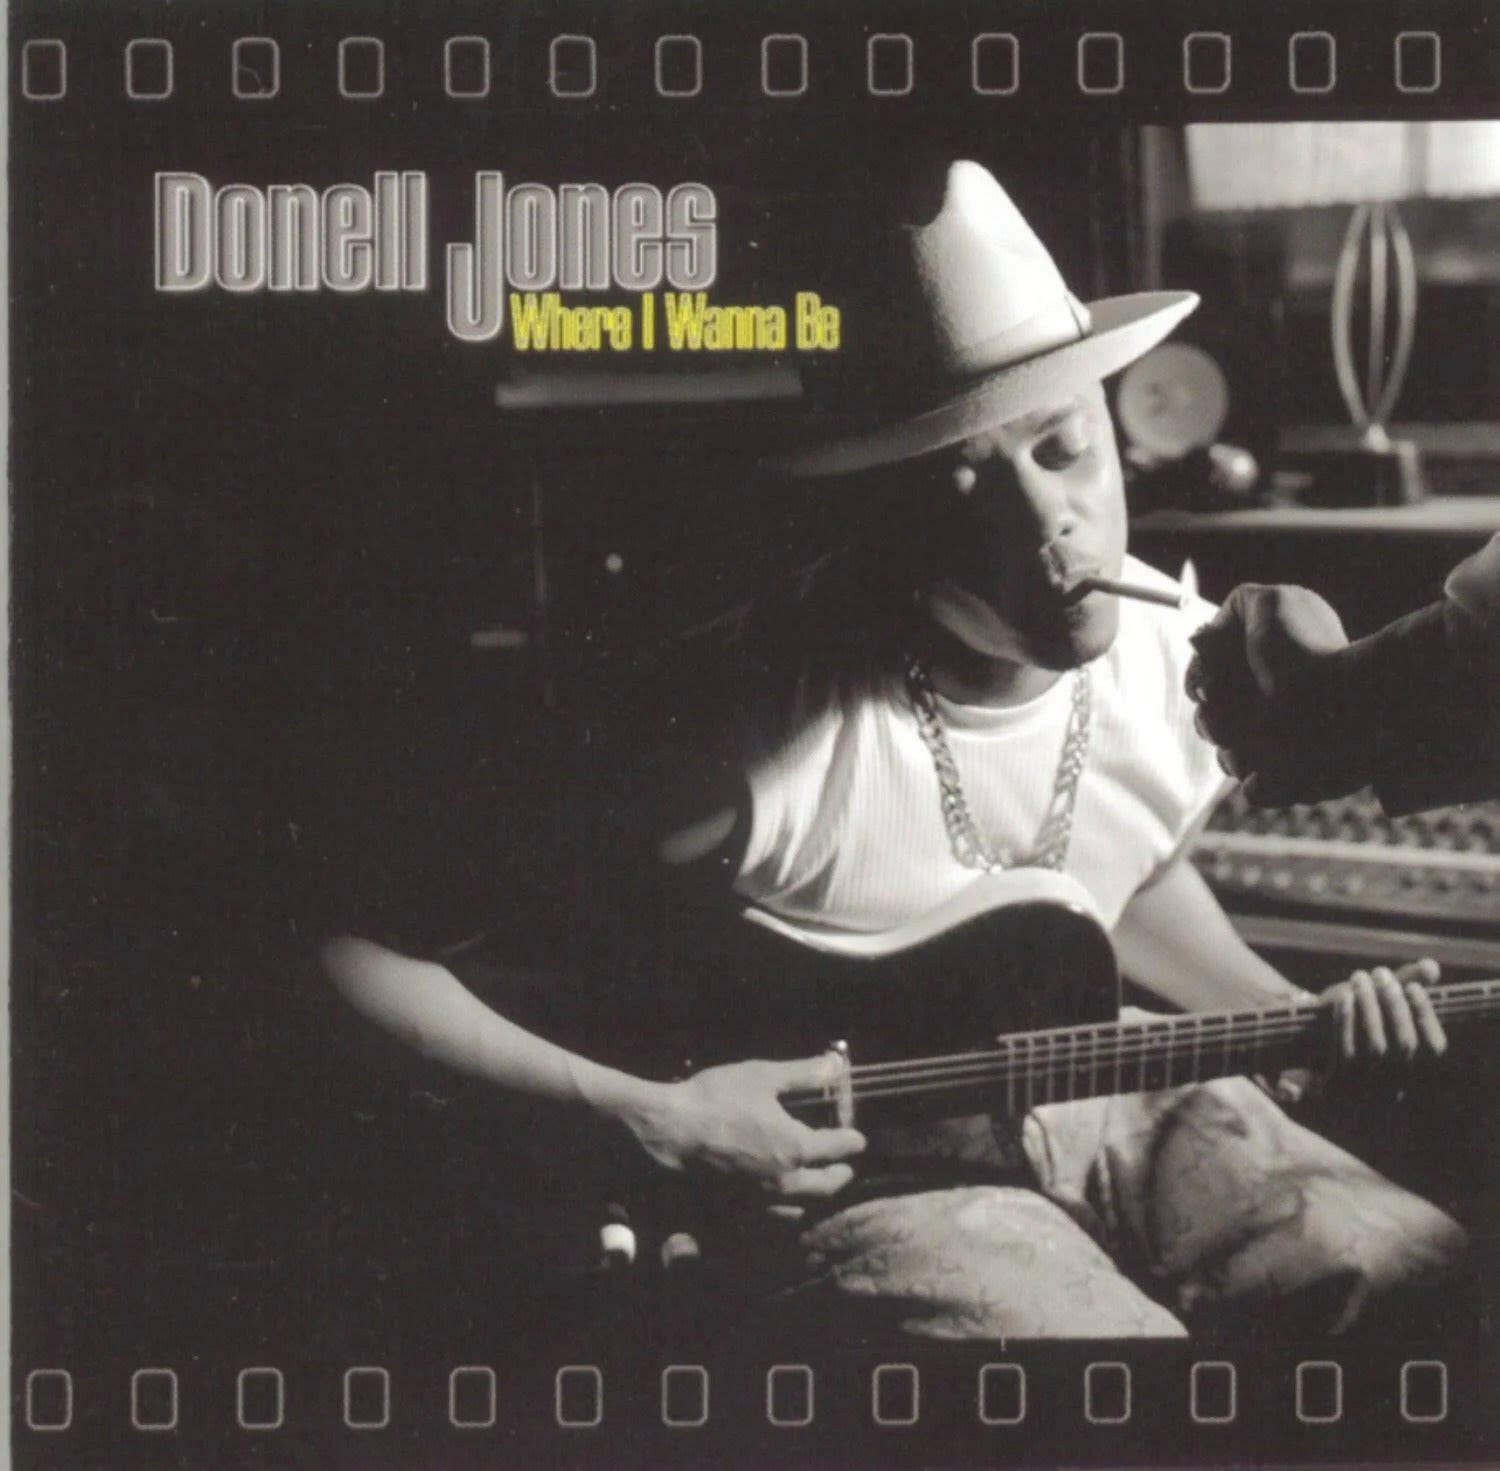 Donell Jones - Where I Wanna Be [CD]